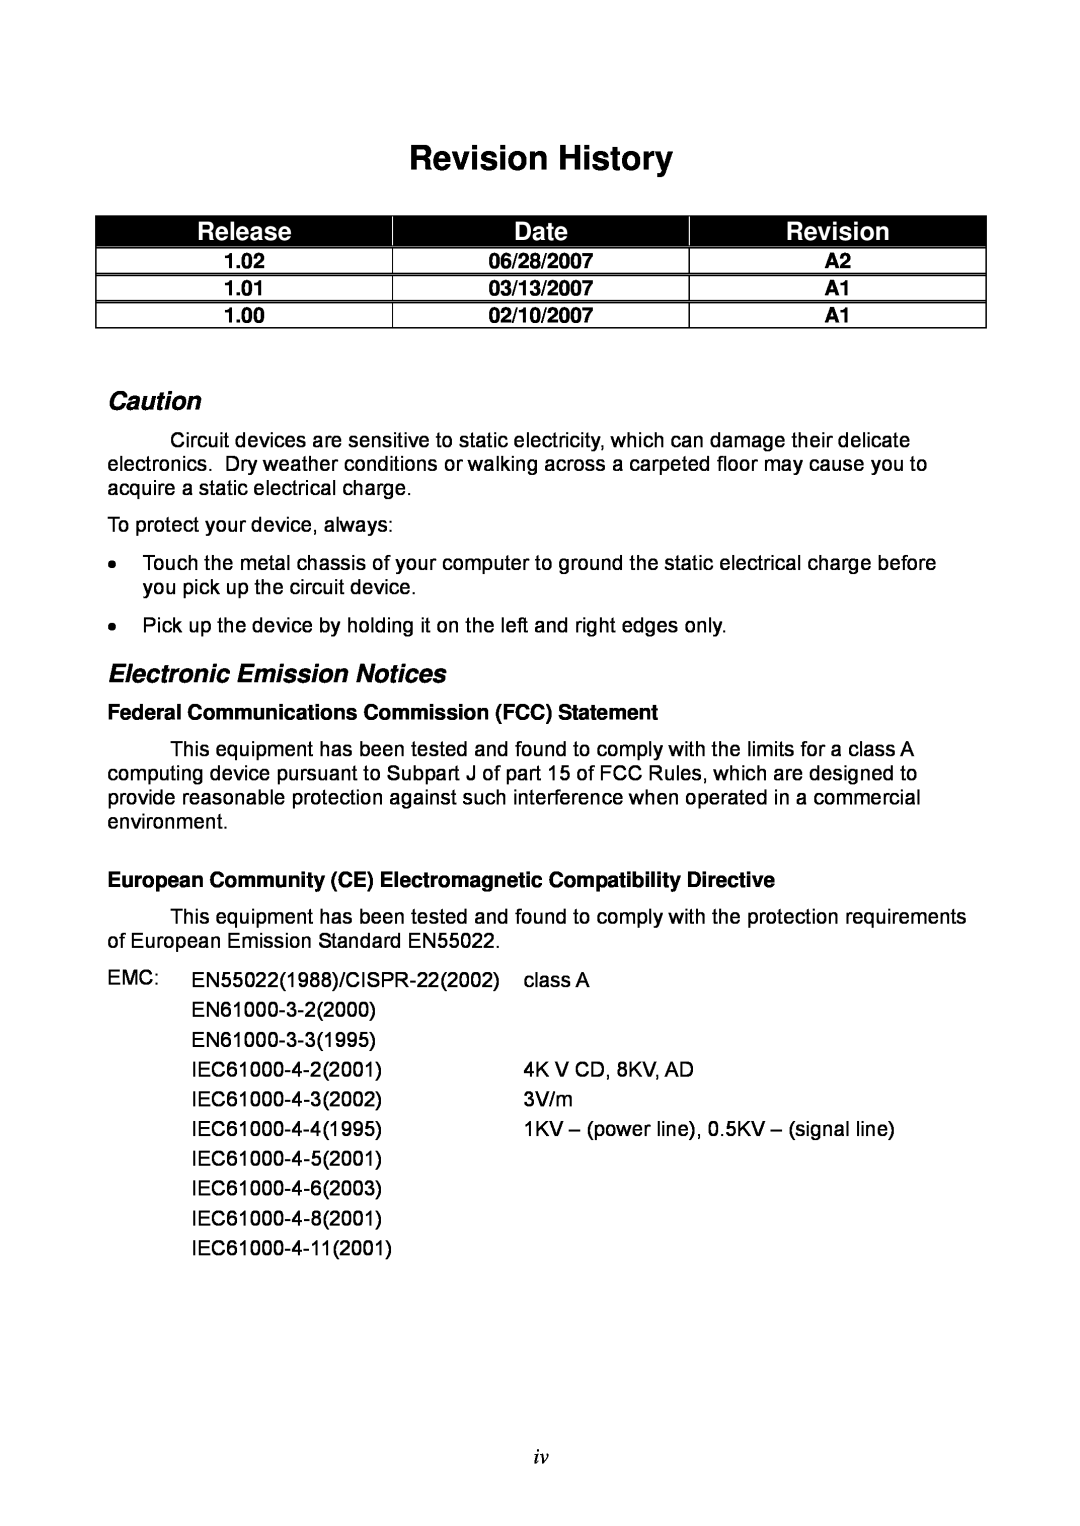 KTI Networks KGS-2404 Revision History, Electronic Emission Notices, 1.02, 06/28/2007, 1.01, 03/13/2007, 1.00, 02/10/2007 